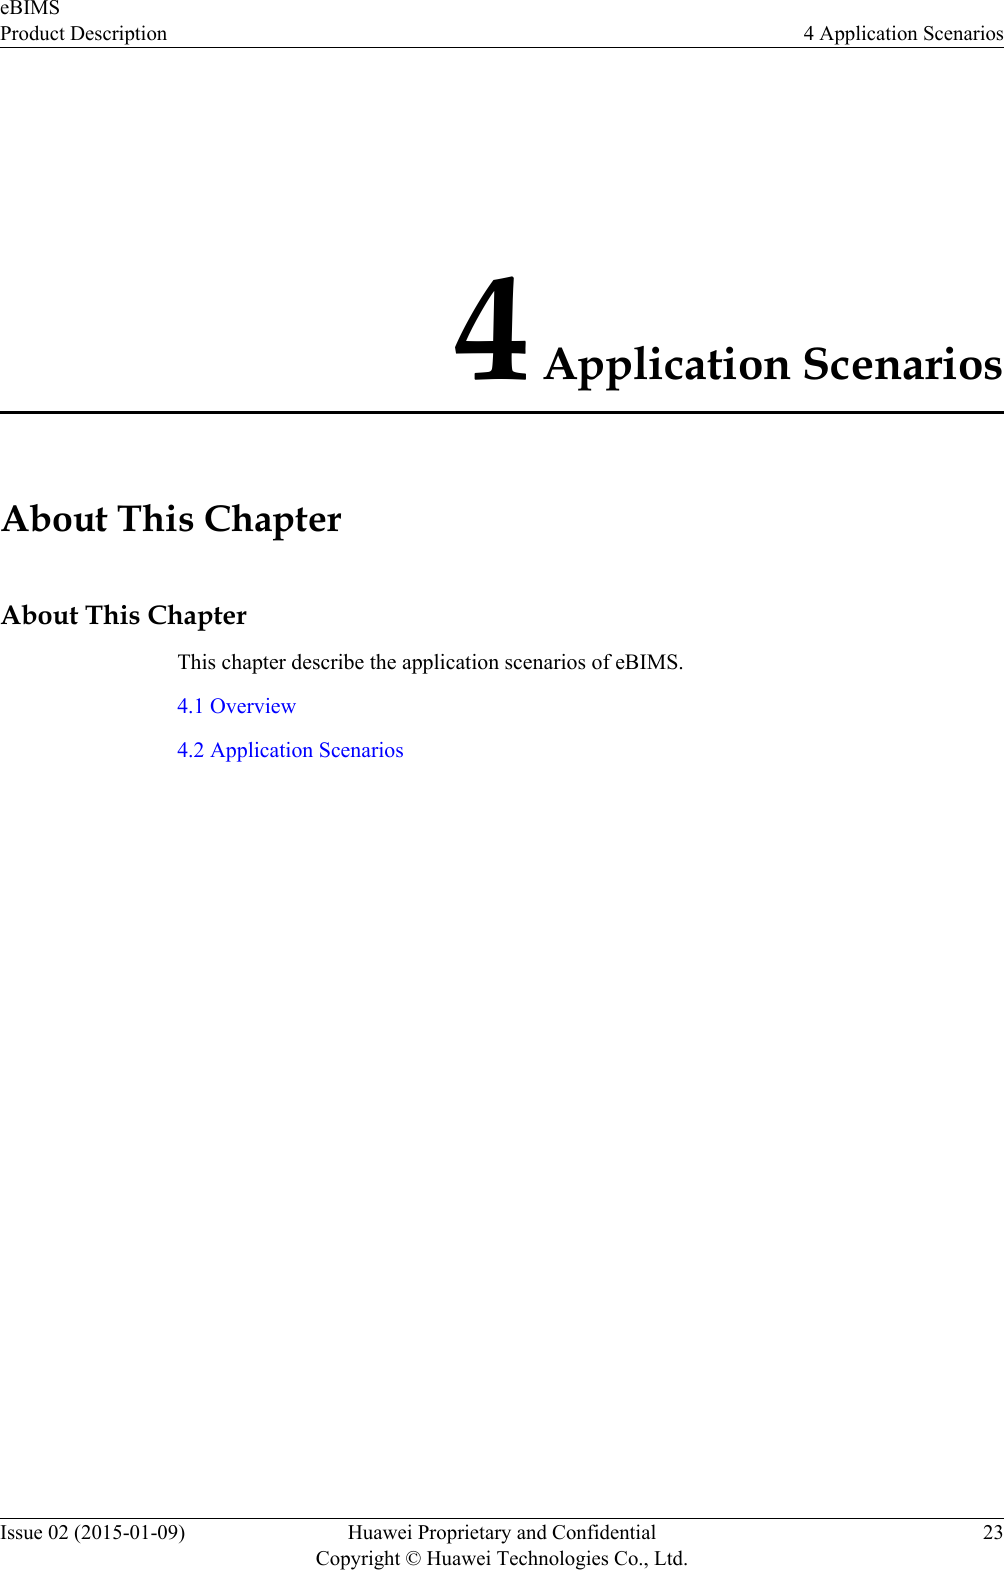 4 Application ScenariosAbout This ChapterAbout This ChapterThis chapter describe the application scenarios of eBIMS.4.1 Overview4.2 Application ScenarioseBIMSProduct Description 4 Application ScenariosIssue 02 (2015-01-09) Huawei Proprietary and ConfidentialCopyright © Huawei Technologies Co., Ltd.23